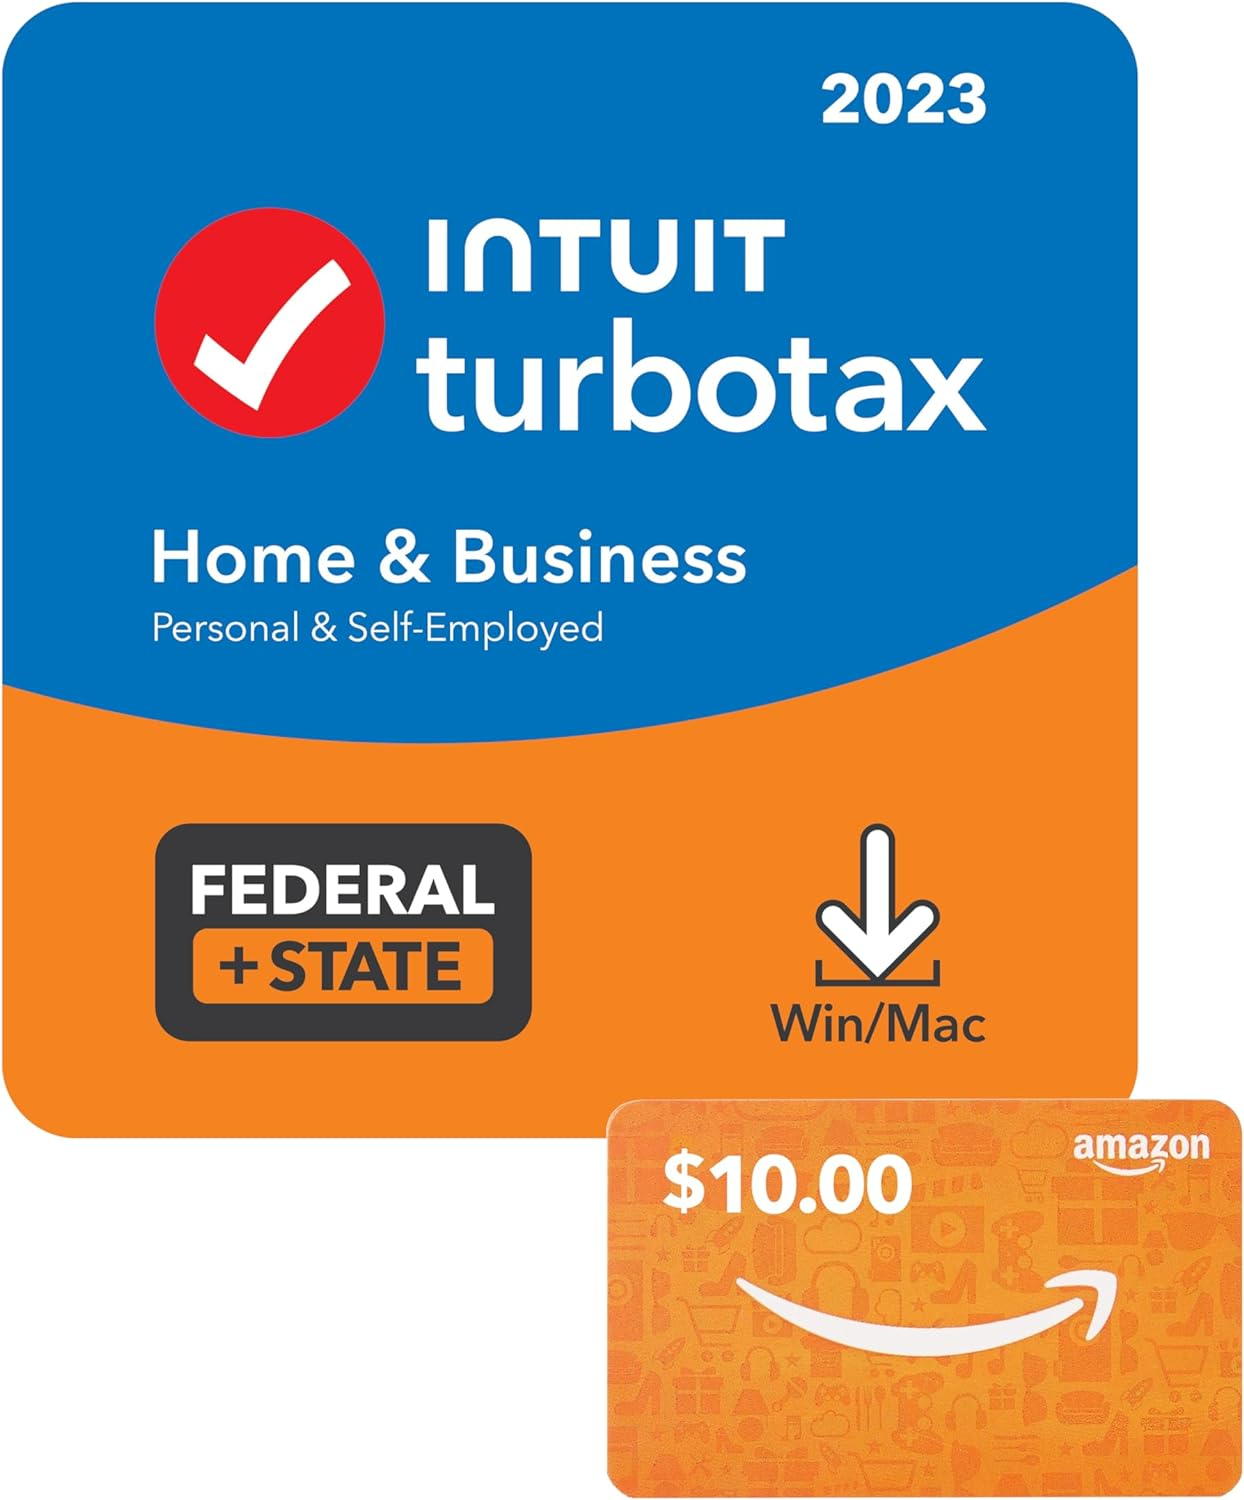 Today Only: TurboTax Premier 2021 + $10 Gift Card As low as $29.99